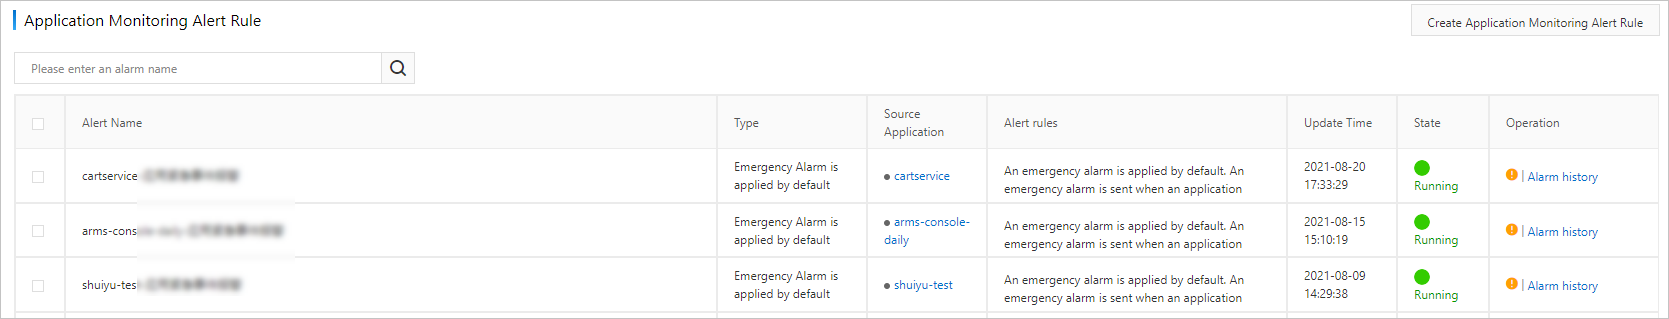 List of application monitoring alert rules